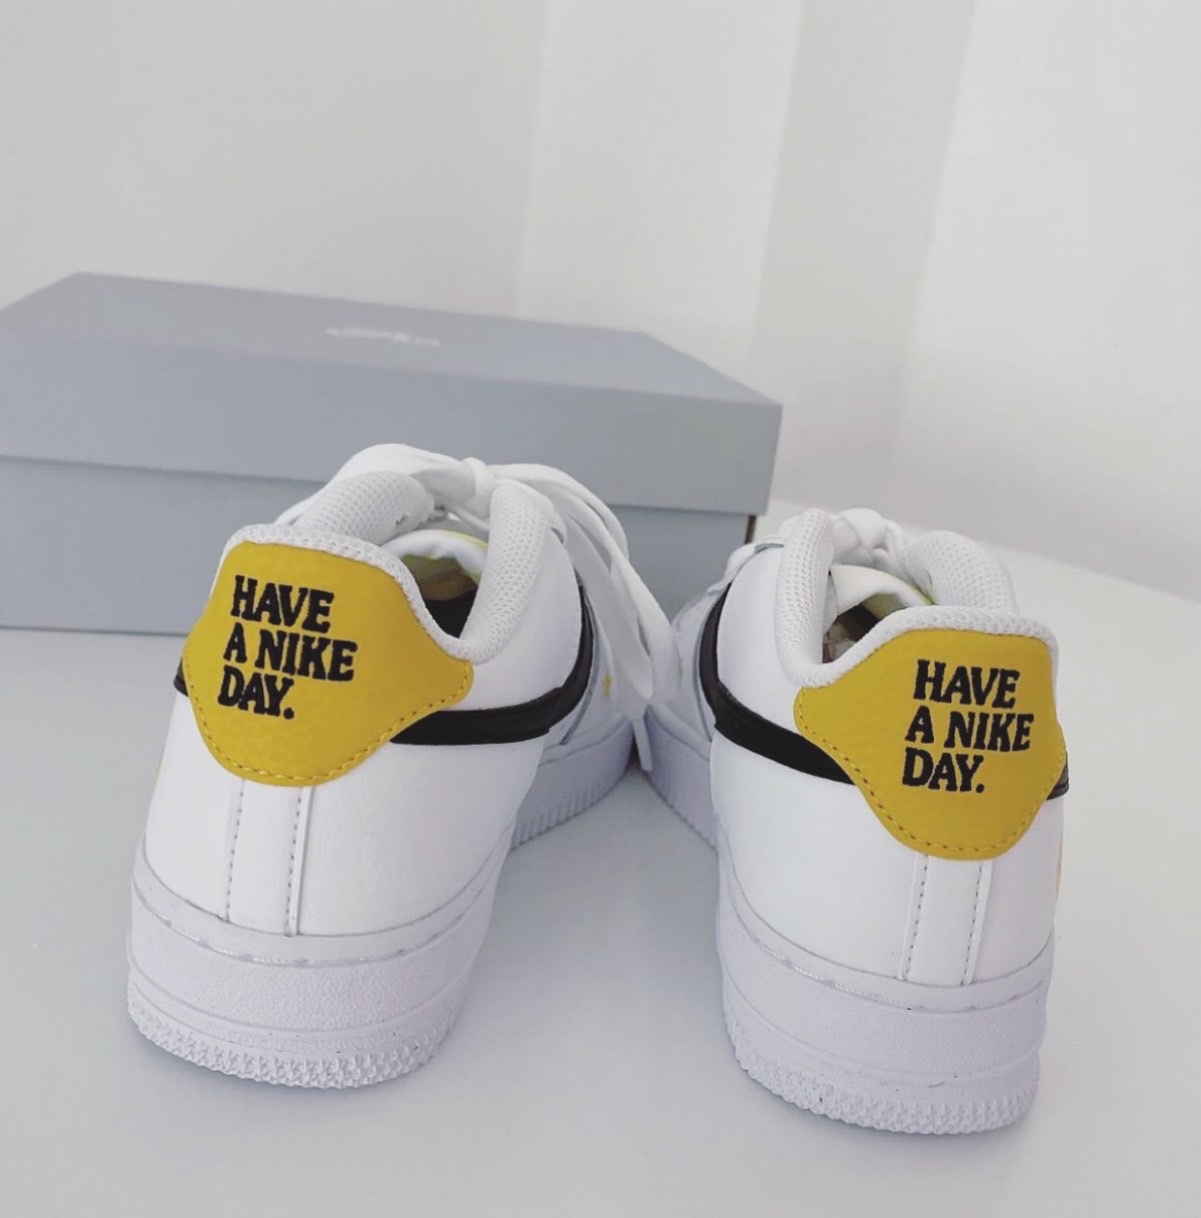 Nike Air Force 1 LV8 DM0983-100 from 66,00 €